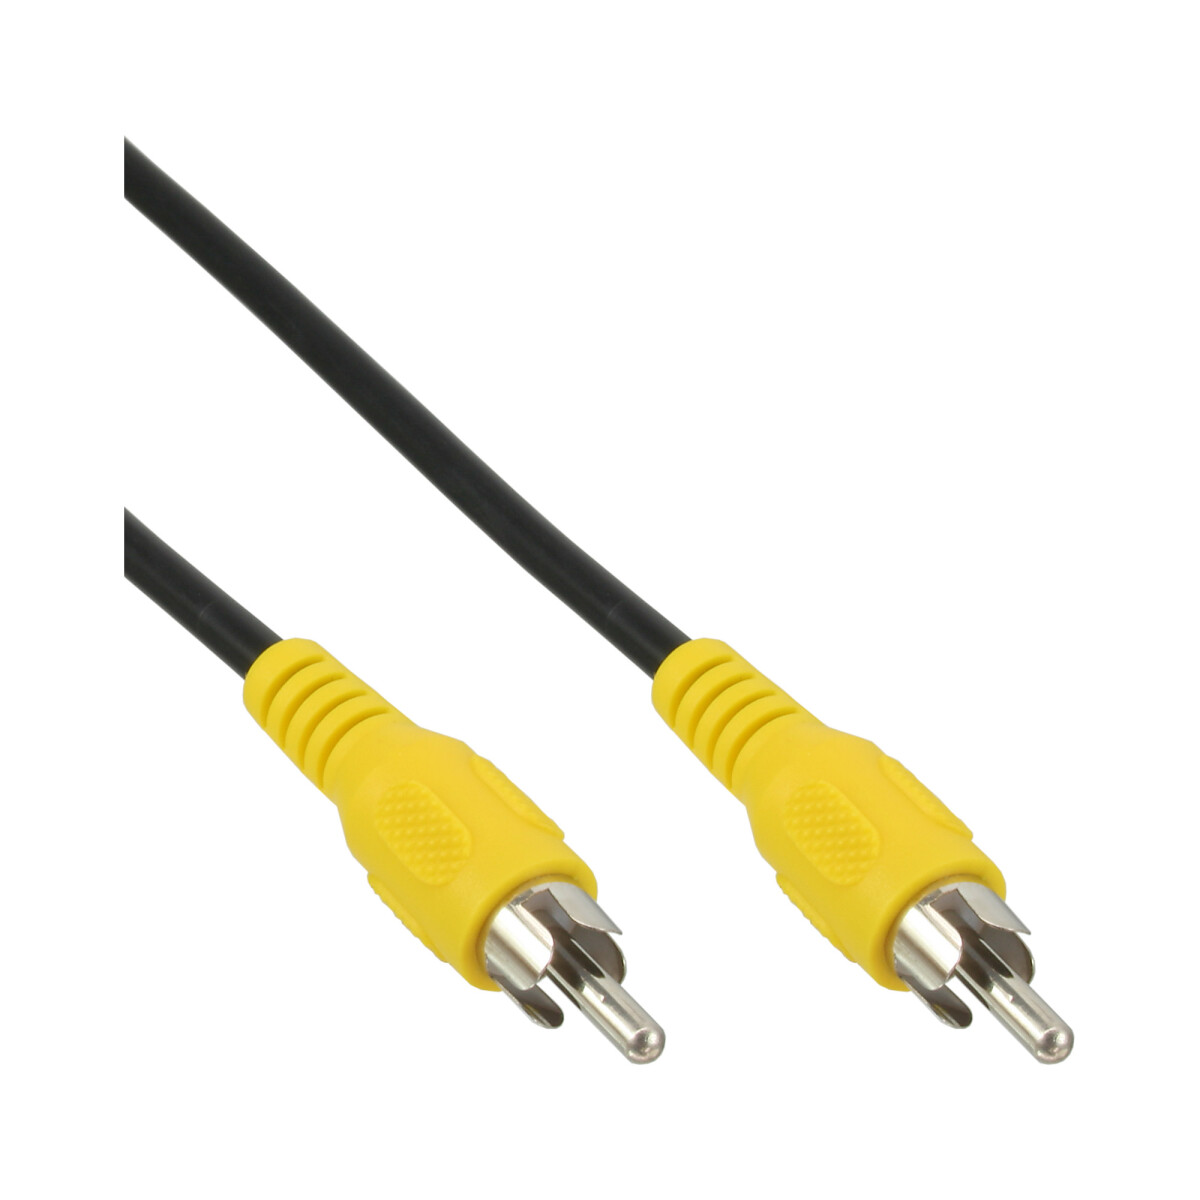 InLine® Video cable, 1x RCA M/M, yellow plugs, 3m